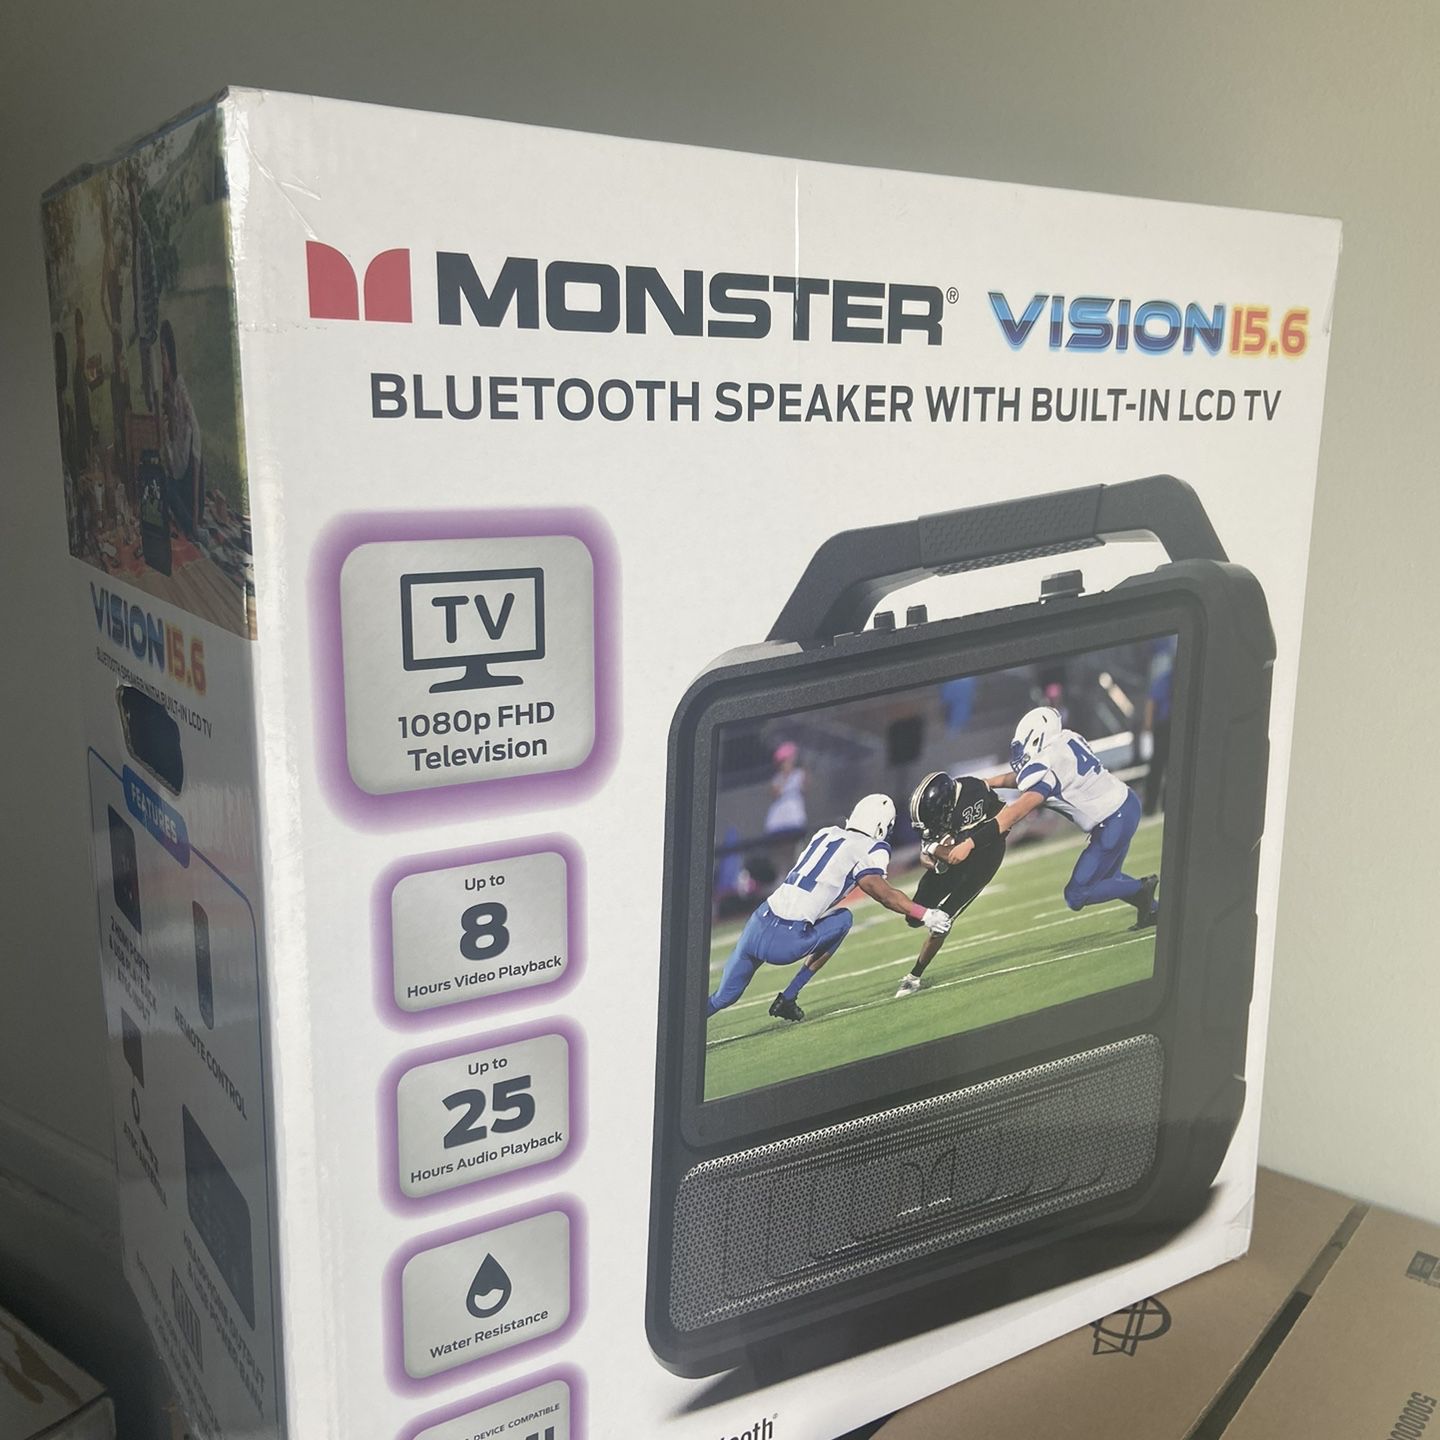 Monster Vision 15.6 Bluetooth Speaker With TV